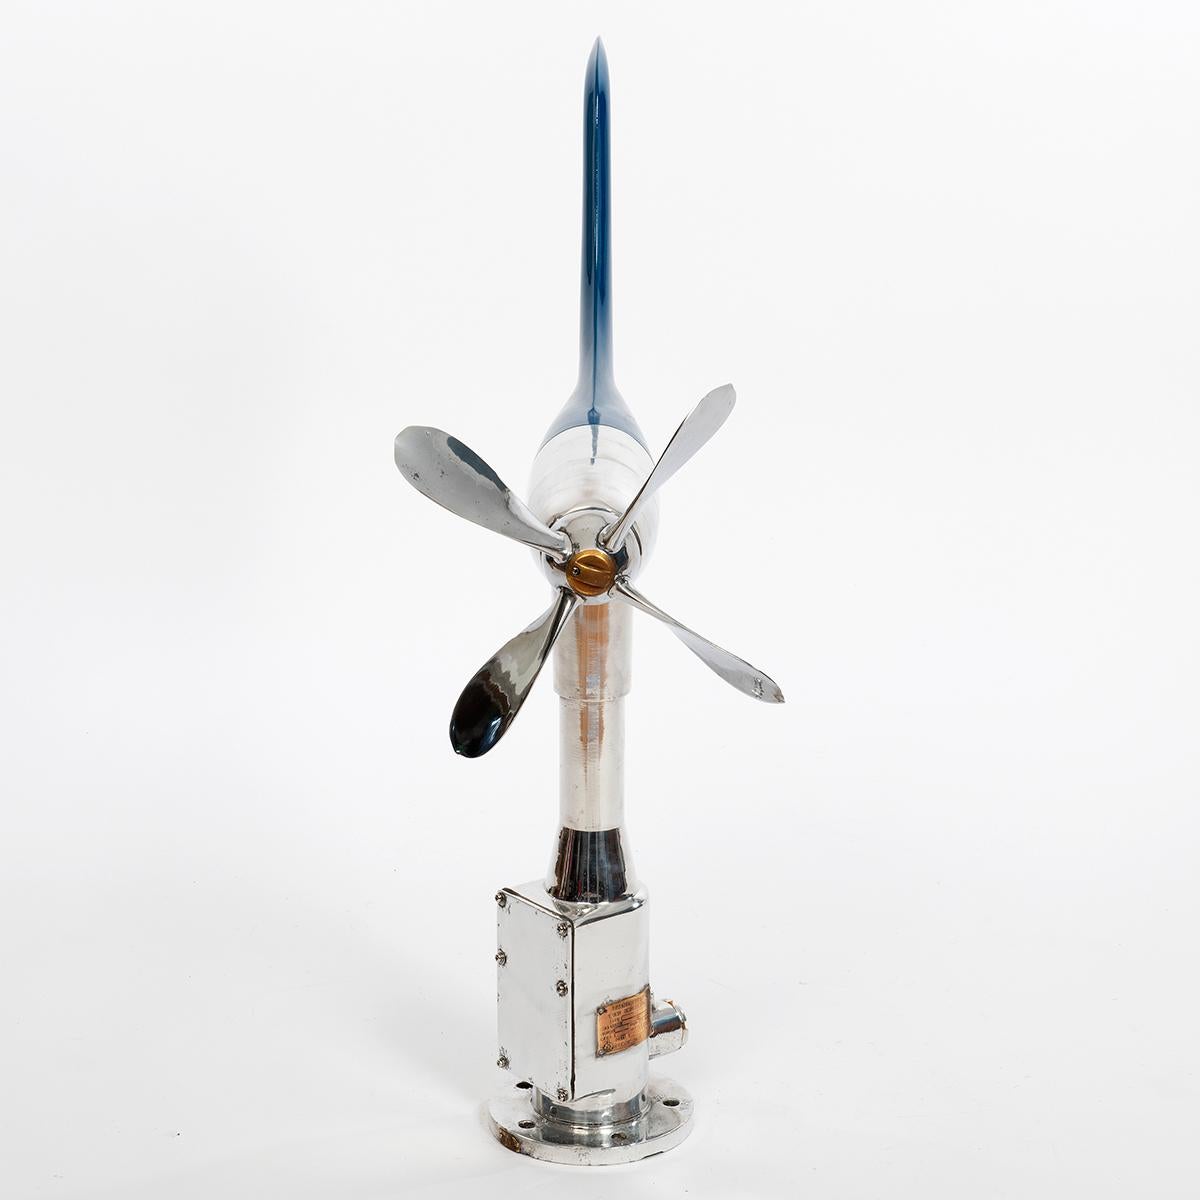 A ship's anemometer and aerovane originally mounted on the top of a container or large ship, where it would be connected to two dials on the bridge to indicating wind speed and direction. Now a stunning sculptural piece, the body and propeller blade